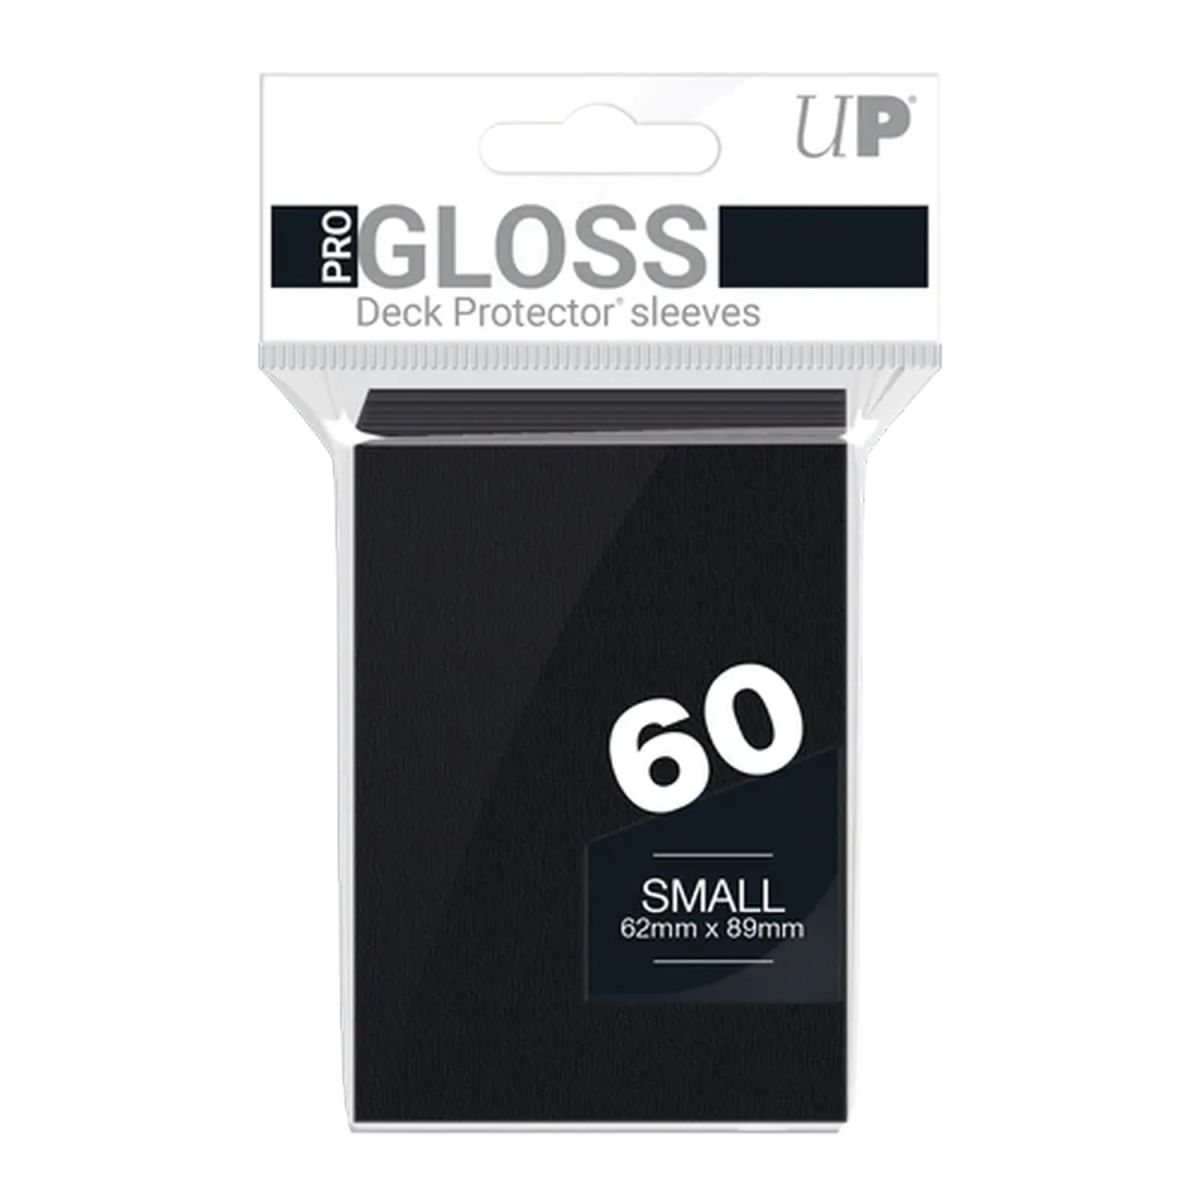 Item Ultra Pro - Card Sleeves - Small Black (60)